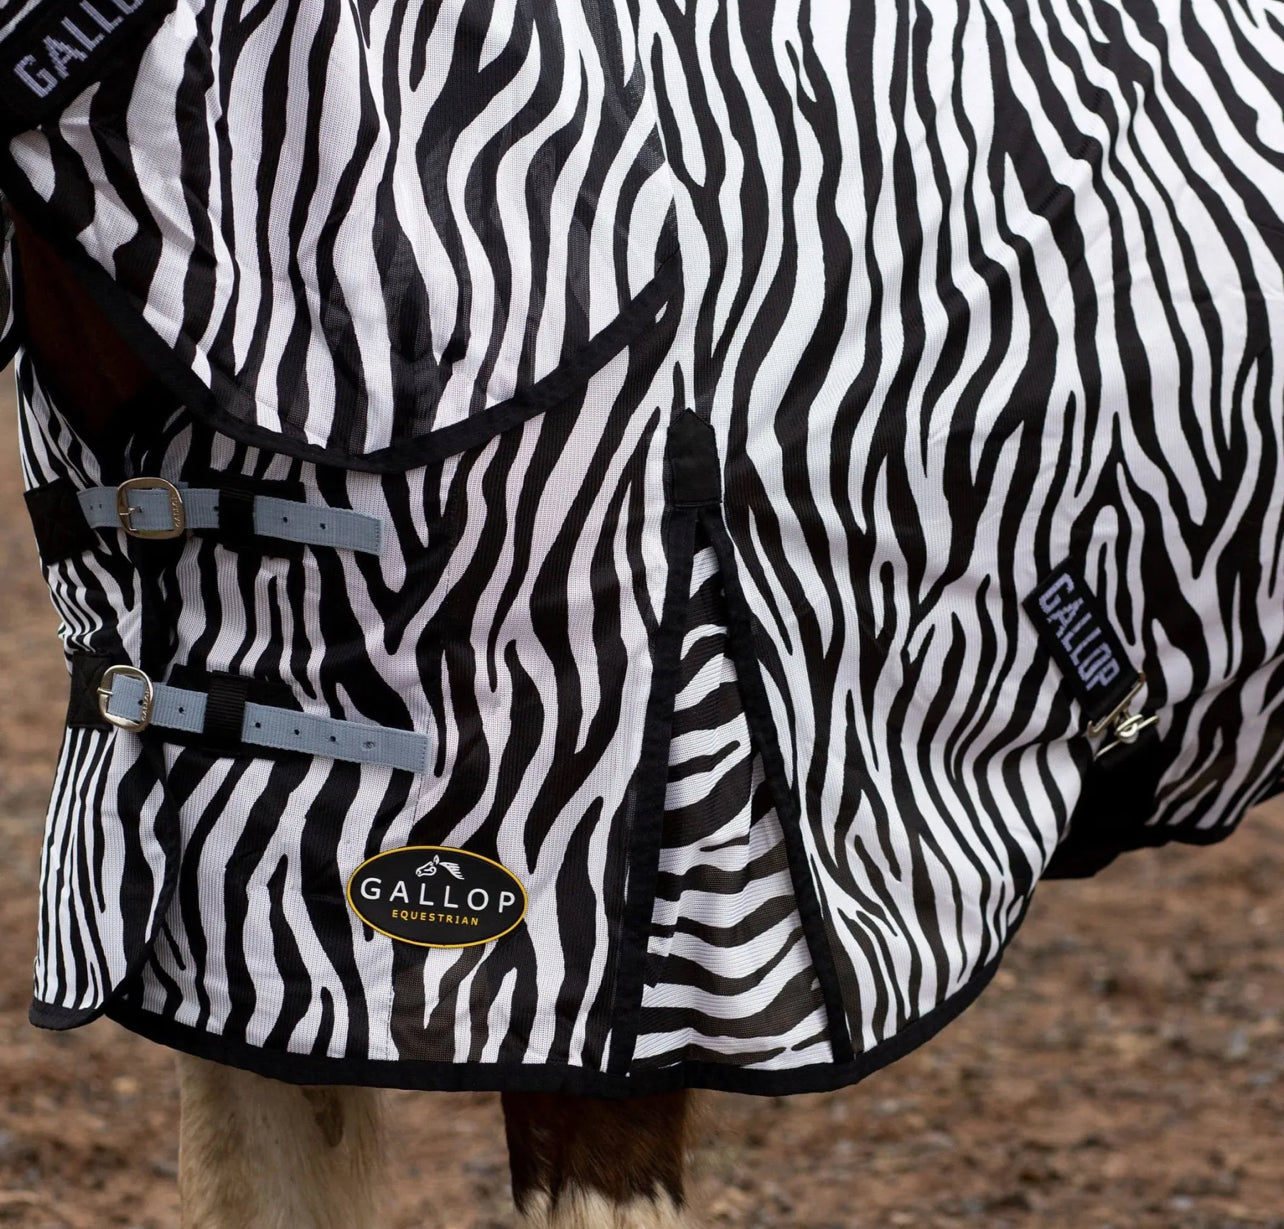 Gallop Zebra Fly Combo Rug